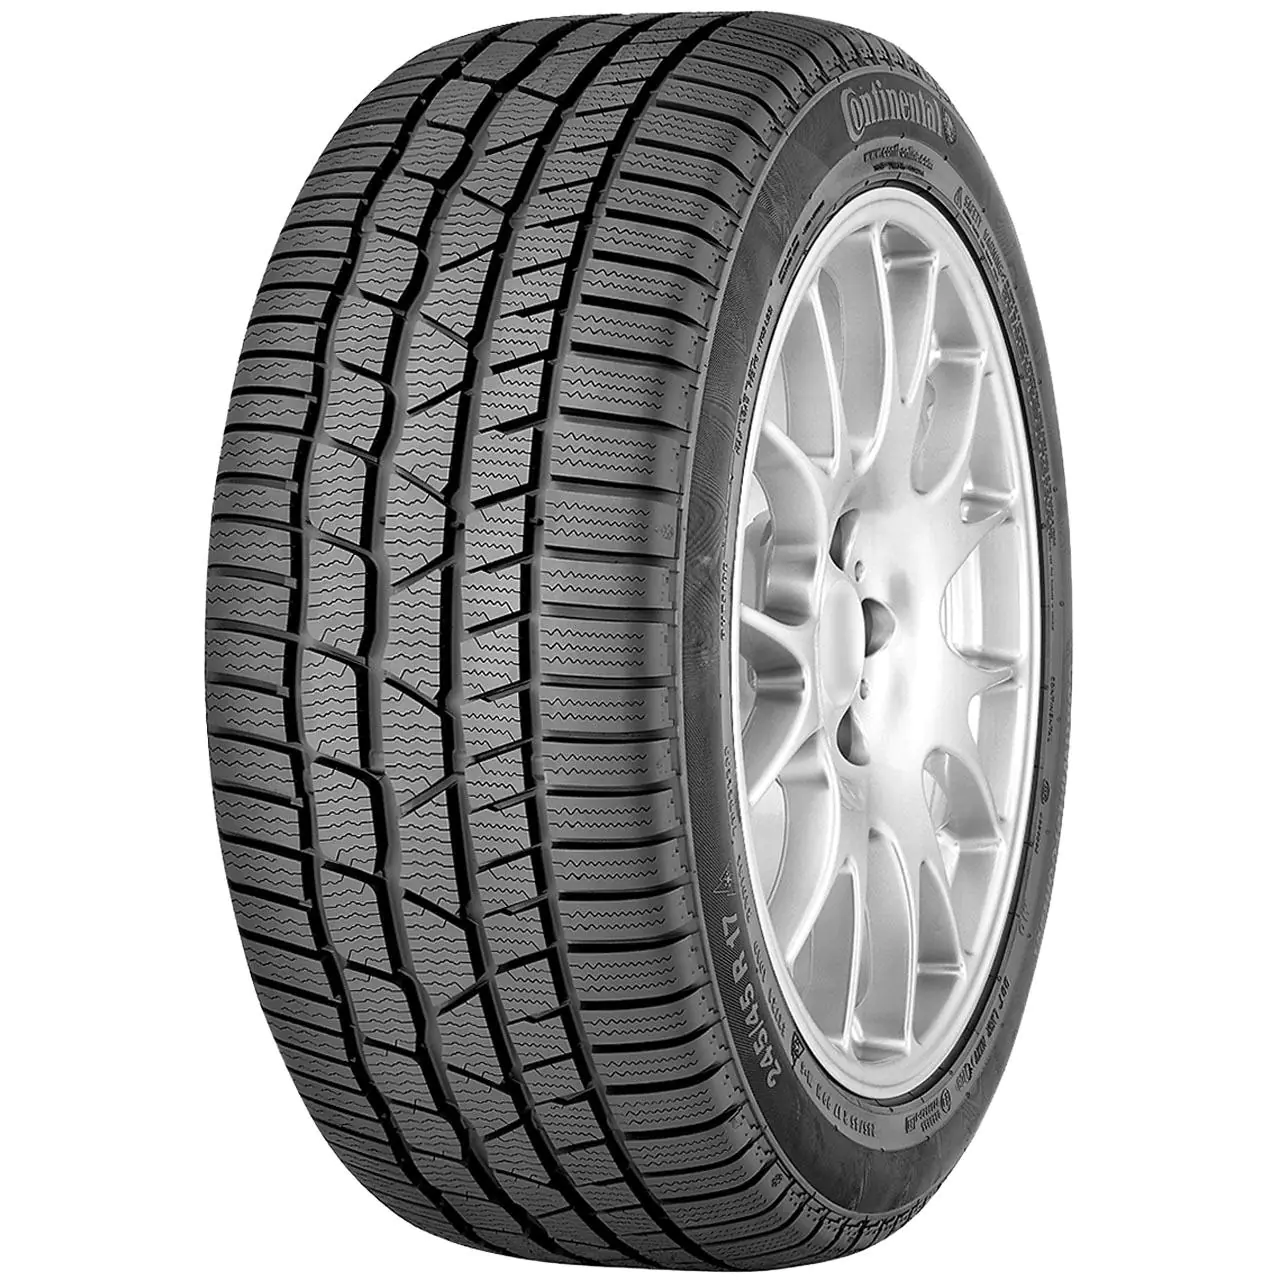 Gomme Autovettura Continental 255/50 R21 109H ContiWinterContact TS830 P ContiSea FR XL M+S Invernale